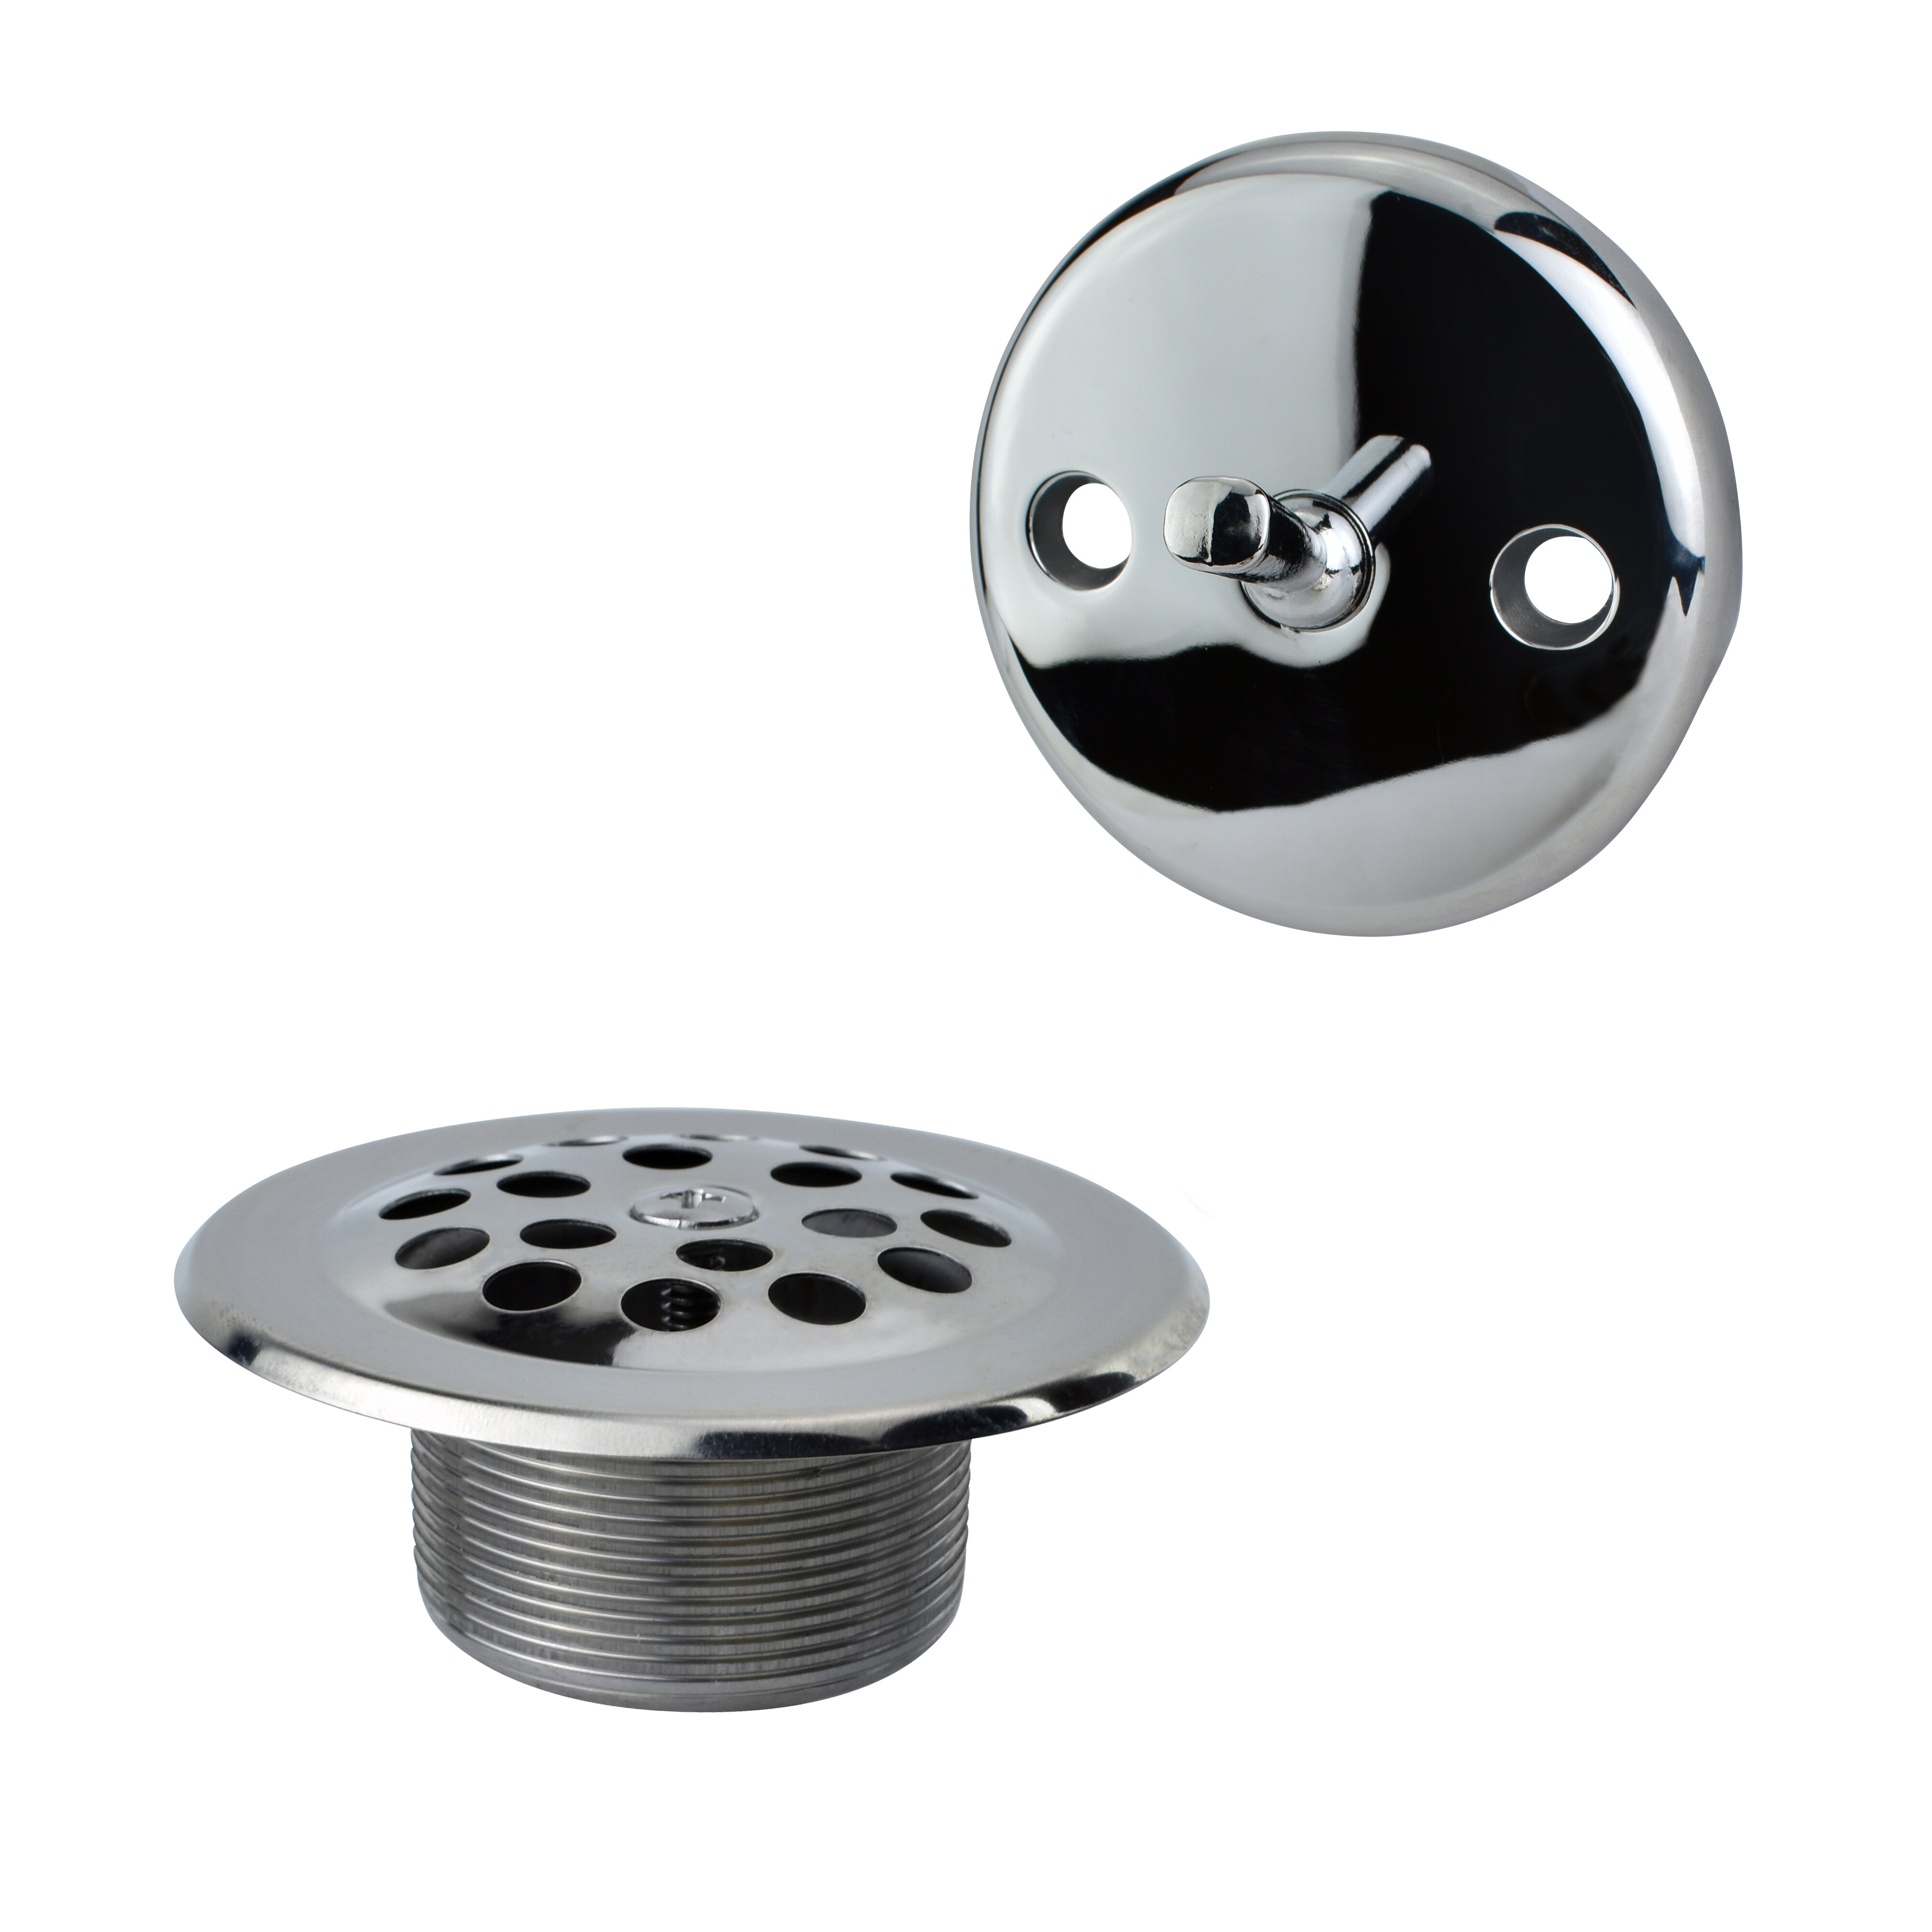 Keeney Two Hole Face Plate Overflow Brushed Nickel Or Oil Rubbed Bronze Chrome 